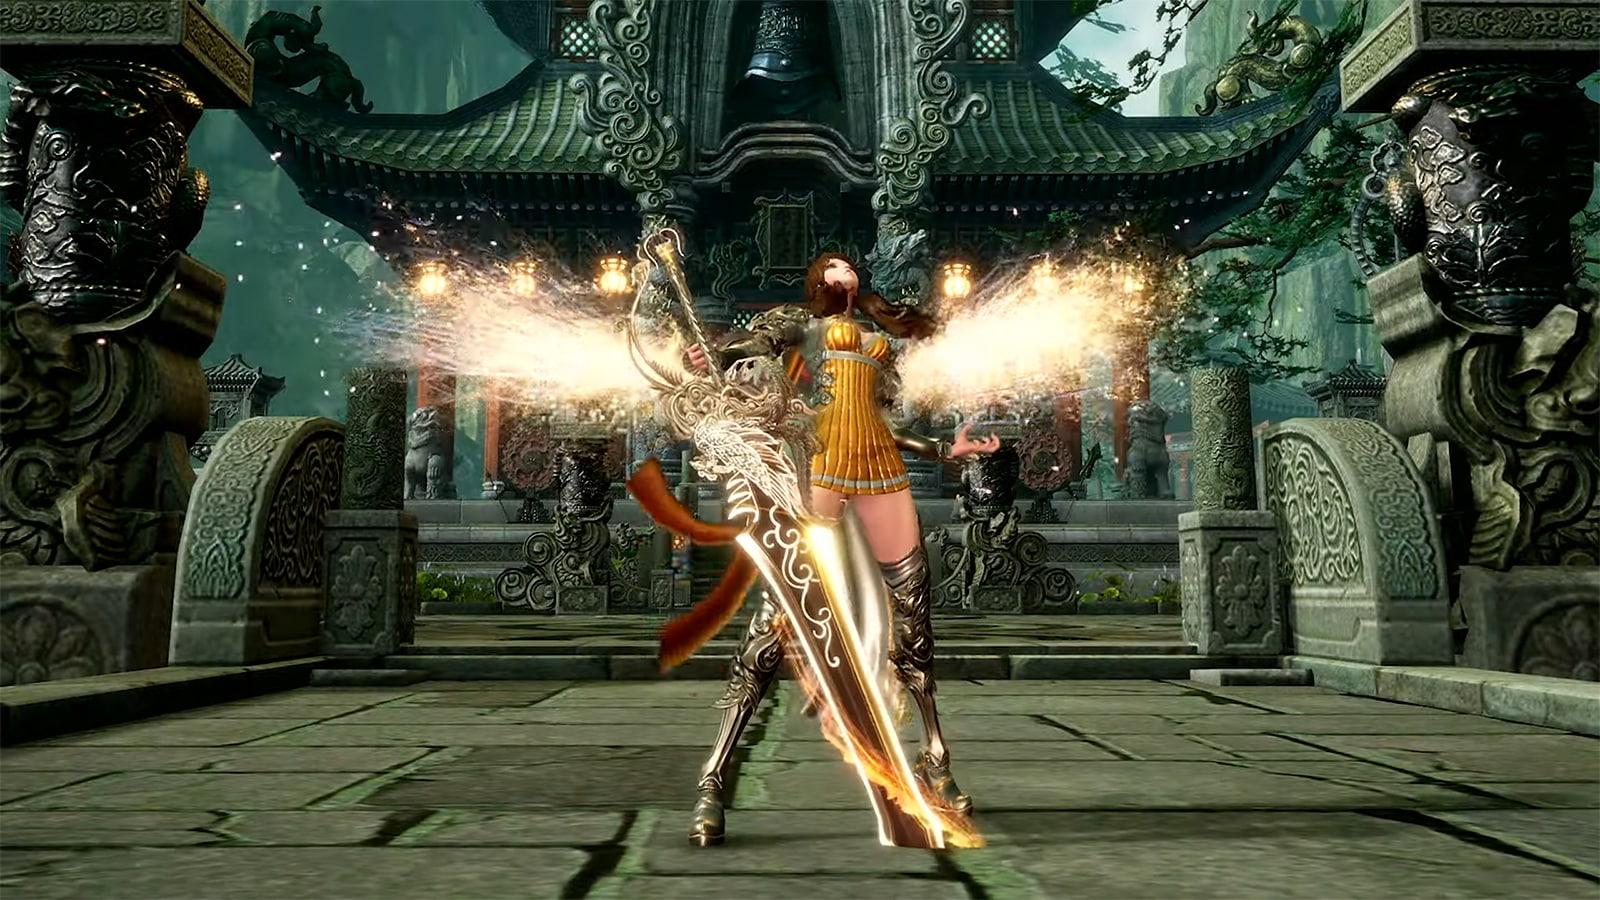 The new 2021 Unreal Engine update shown in the free MMO, Blade and Soul